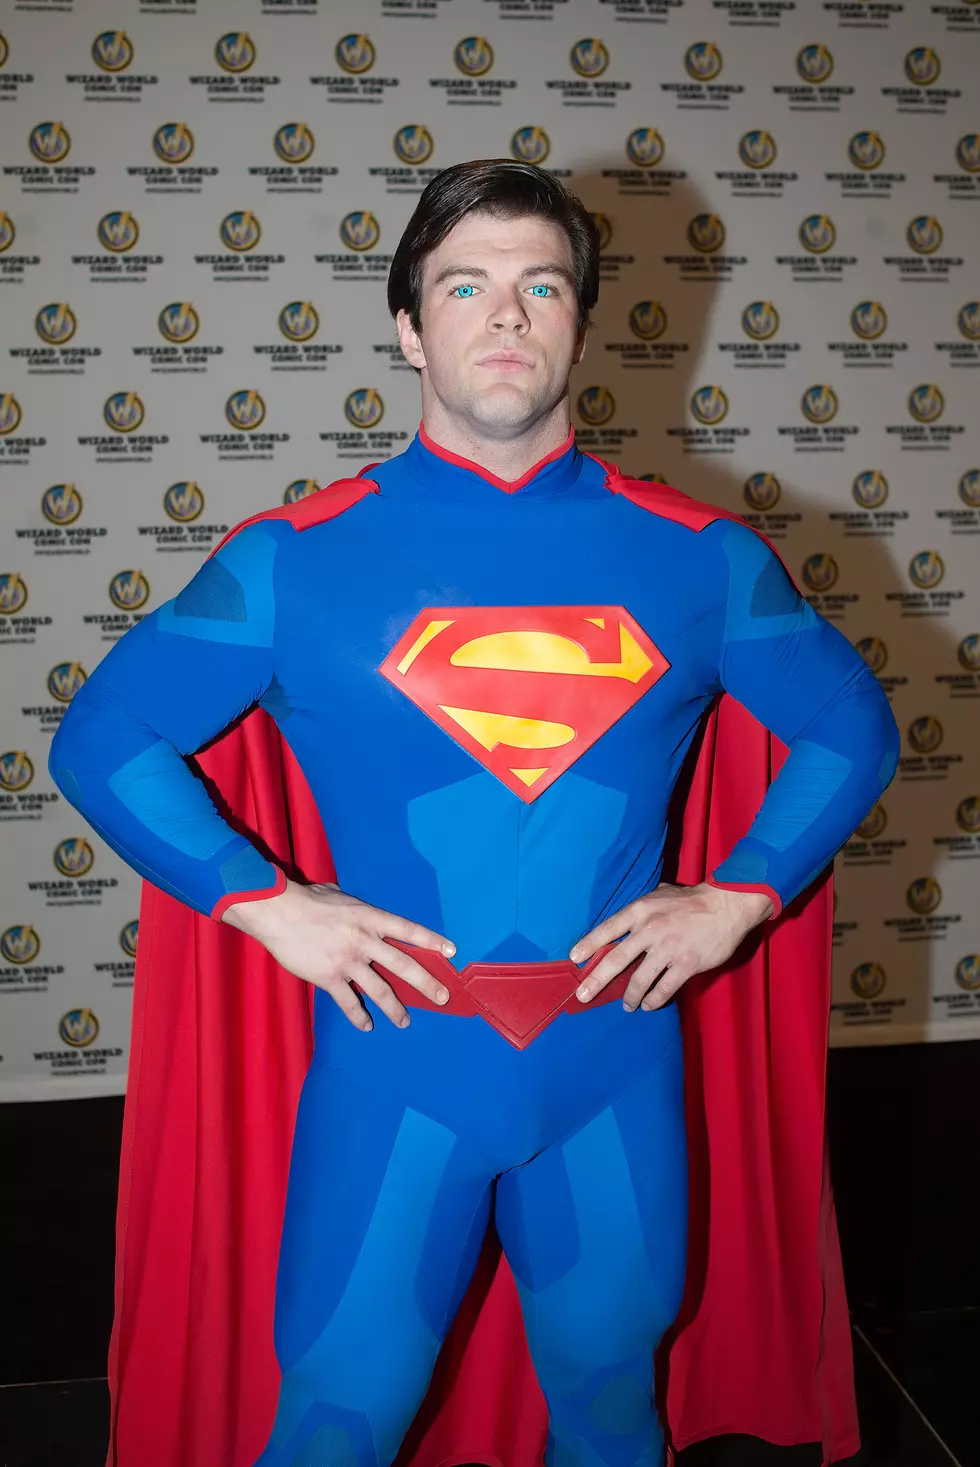 Be Superman for a Day! Check Out this Awesome GoPro Video!